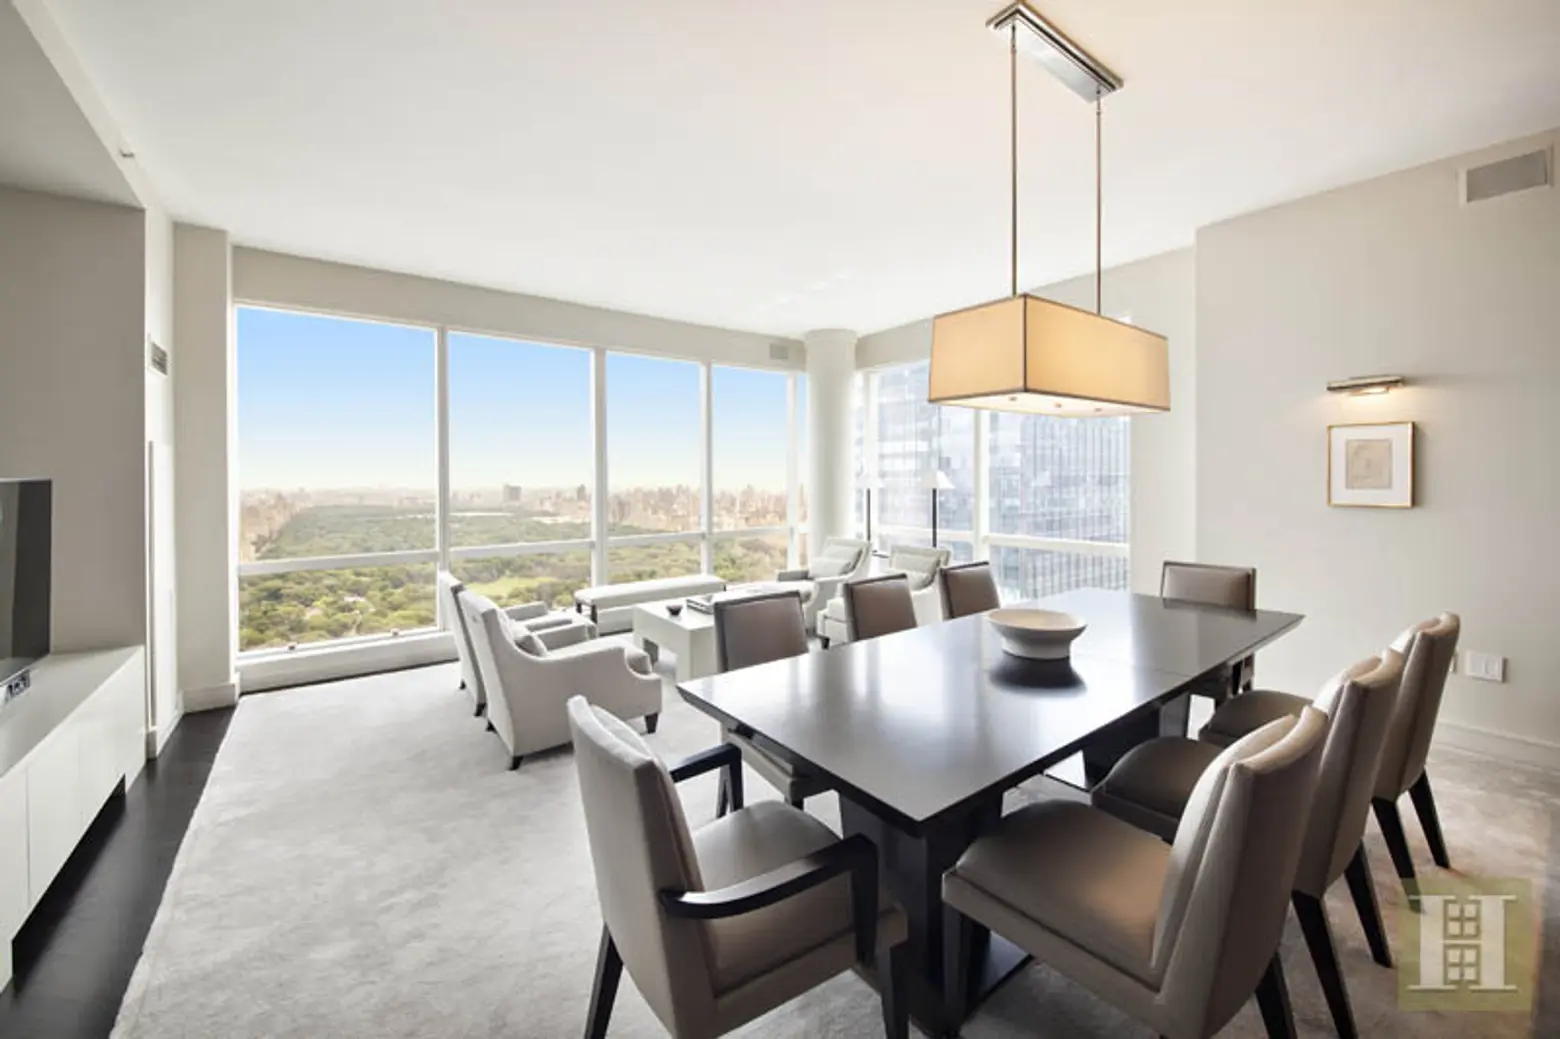 Chris Meloni of ‘Law & Order: SVU’ Fame Tries Again to Unload Park Imperial Condo